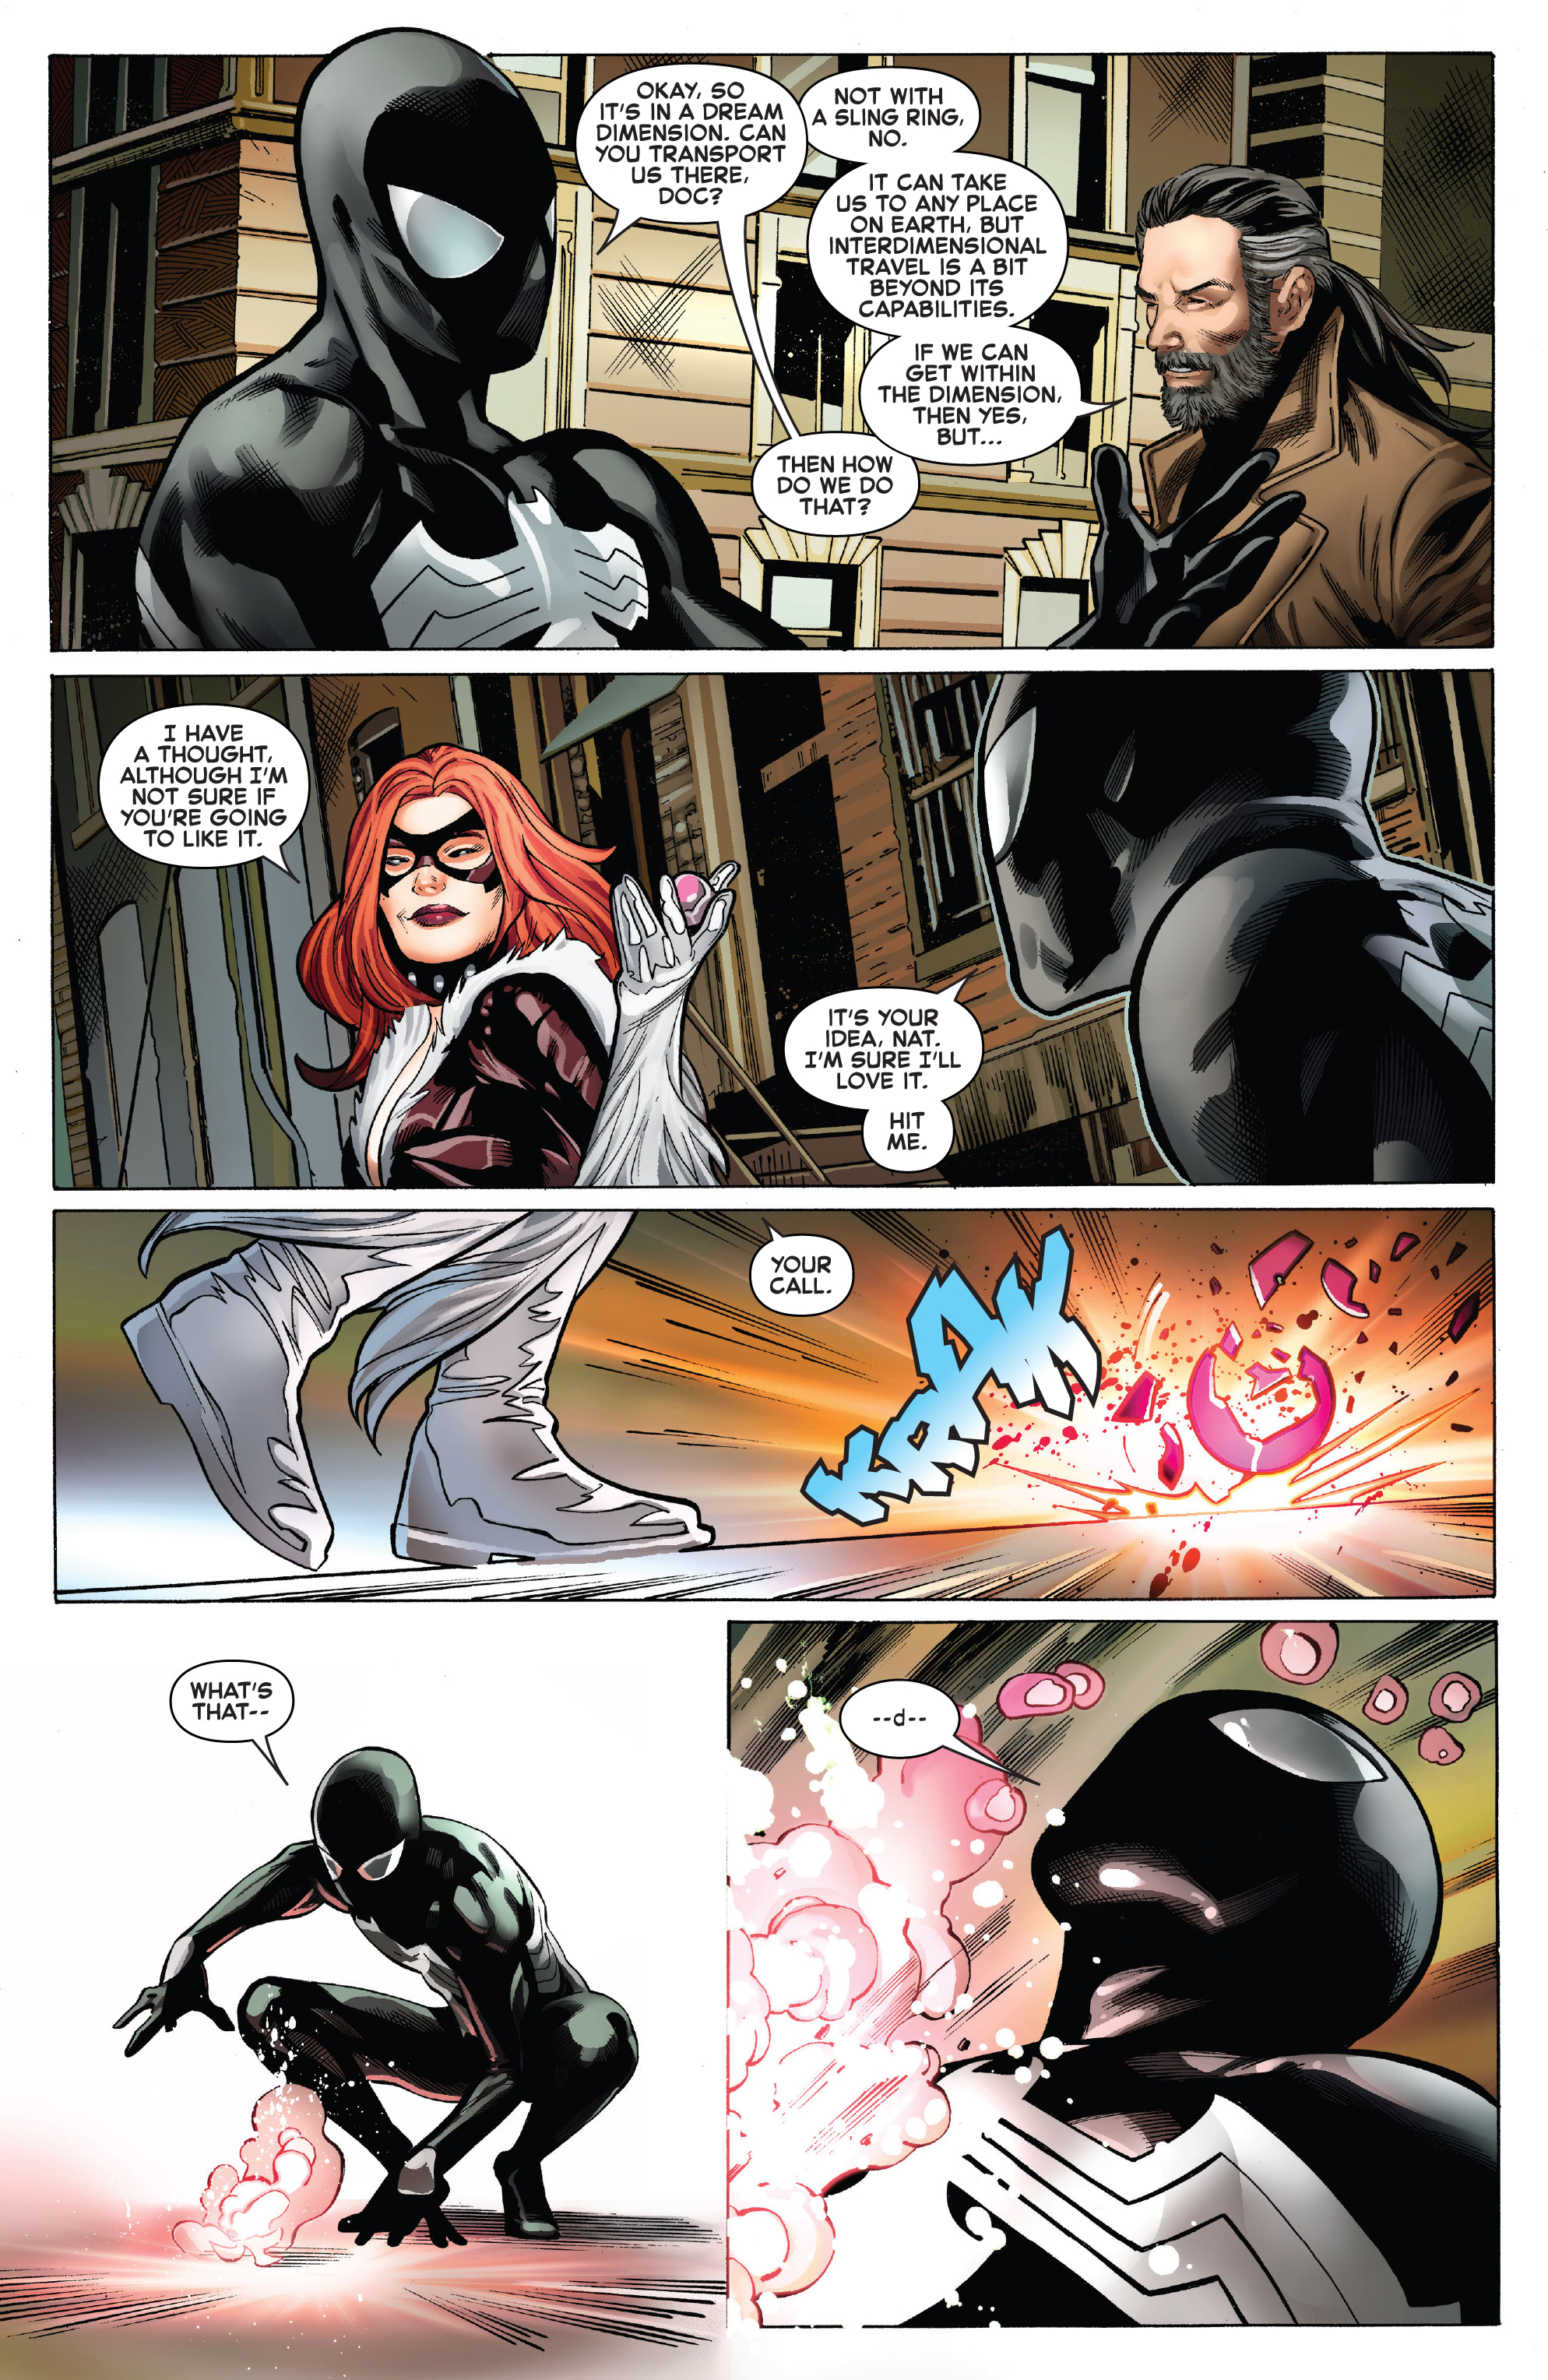 Symbiote Spider-Man: Alien Reality (2019-): Chapter 4 - Page 8.